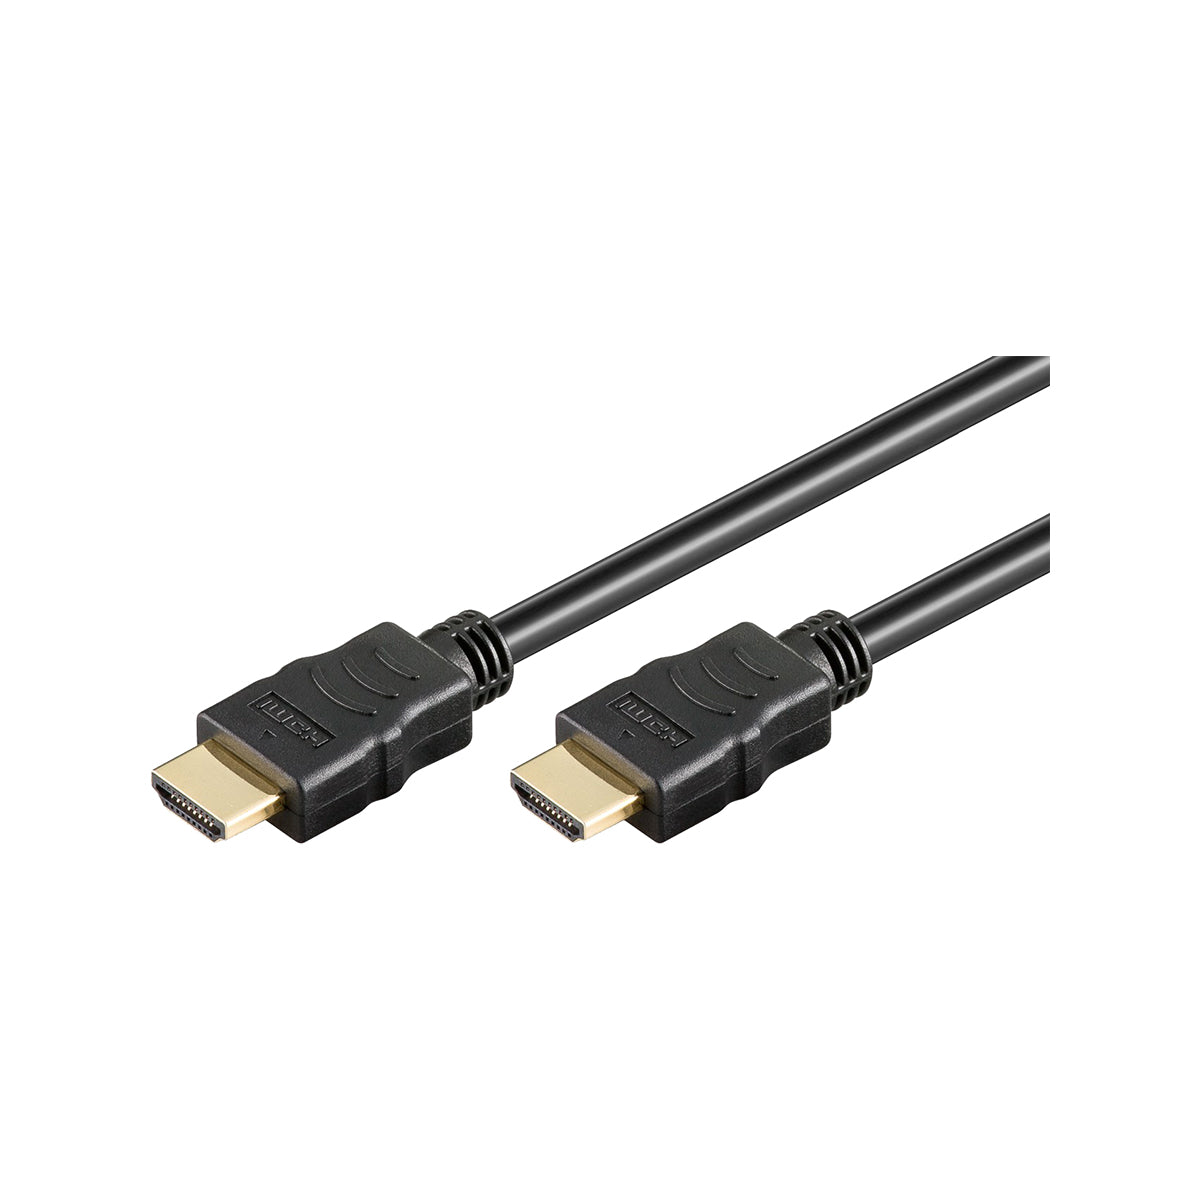 Goobay High Speed HDMI™ Cable with Ethernet (4K@60Hz) 7.5M for Laptops